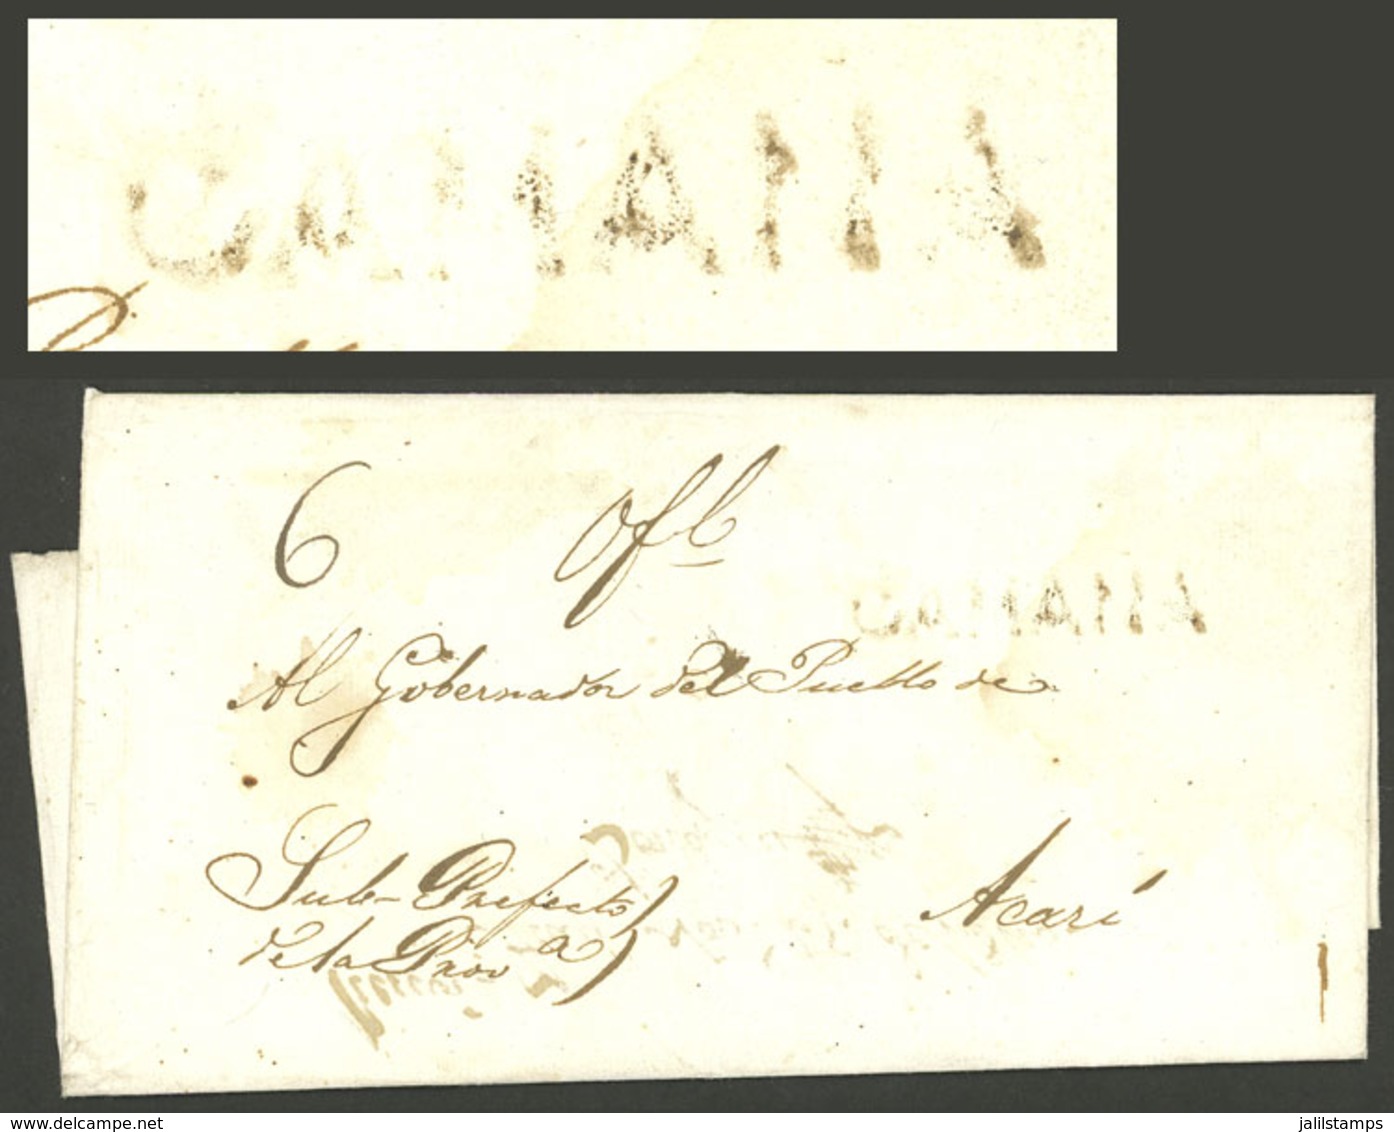 PERU: Folded Cover Dated 29/NO/1840 Sent To Acarí, With Black "CAMANA" Mark, Rare In This Color, Very Fine Quality!" - Peru